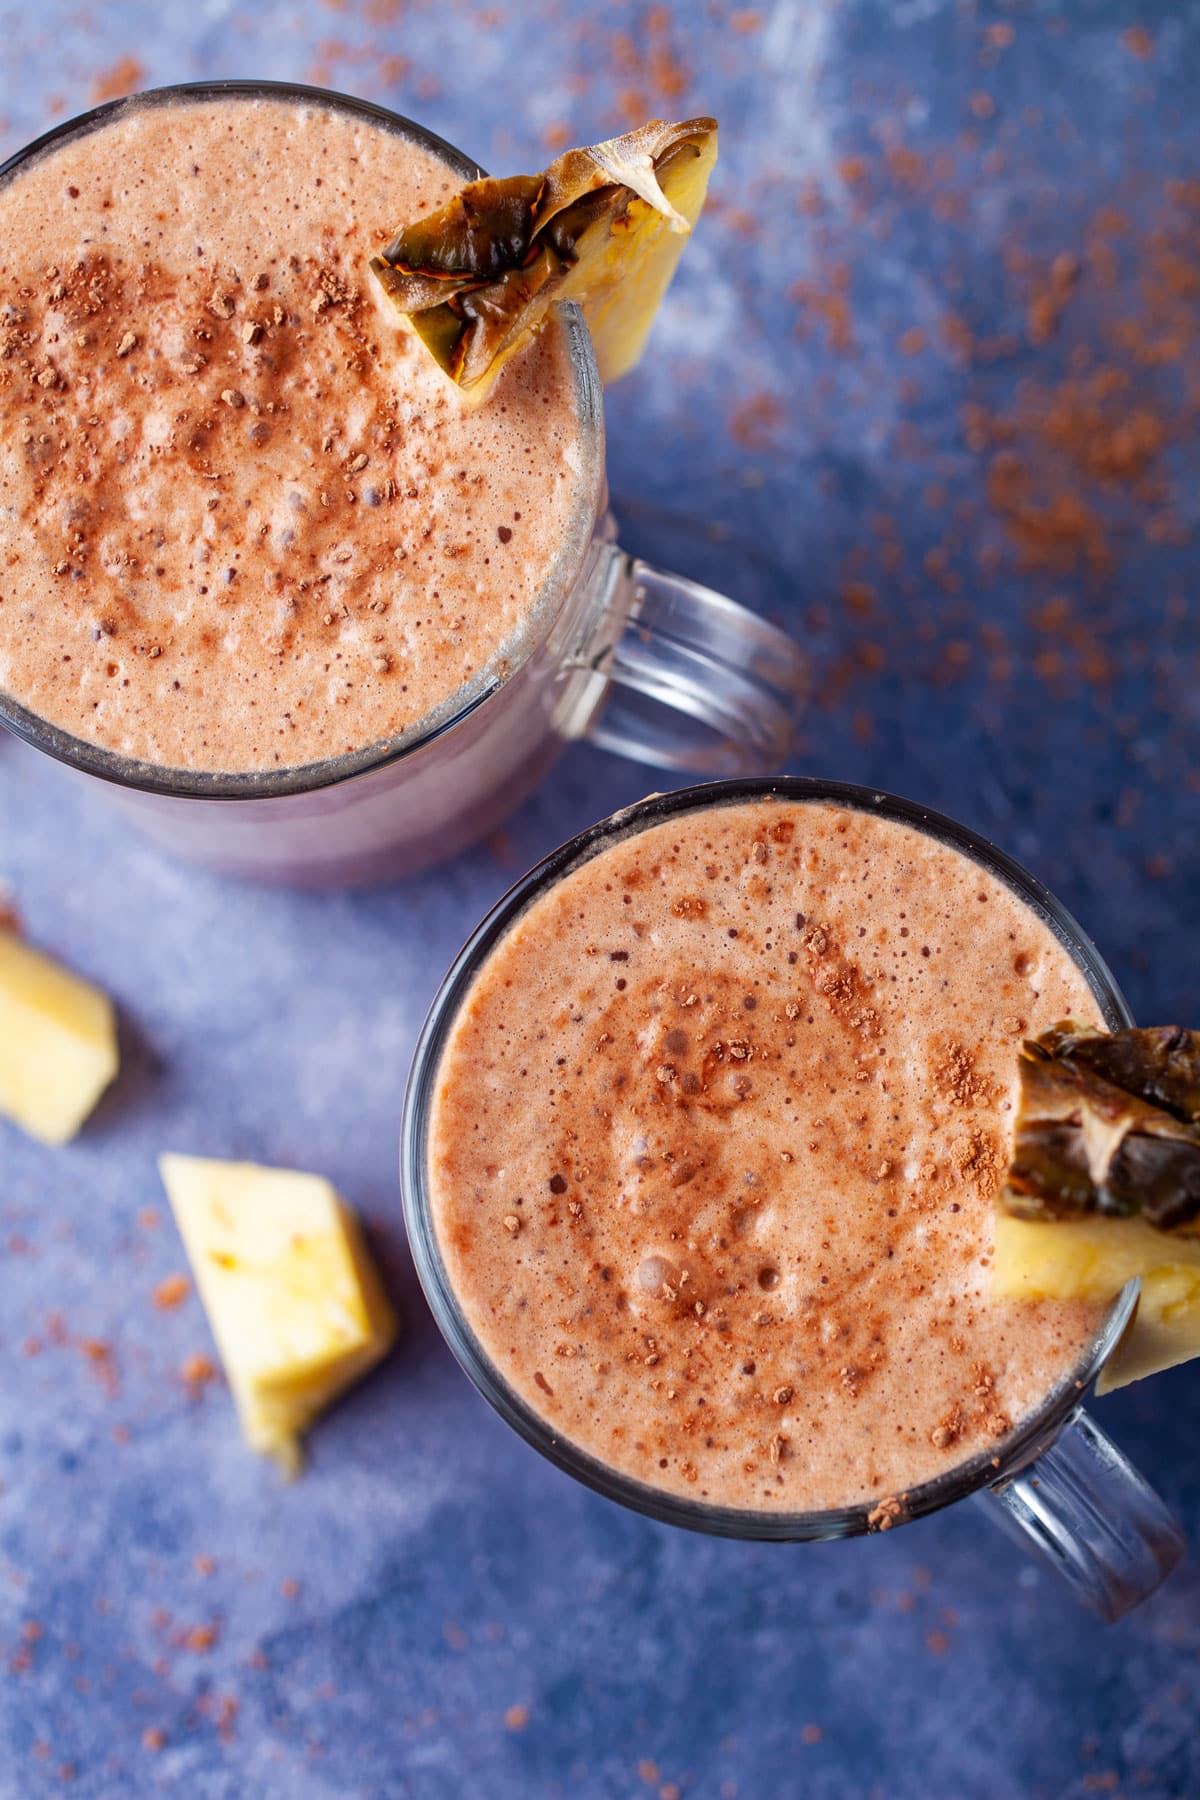 Creamy and frothy chocolate and pineapple smoothies topped with fresh pineapple slices.